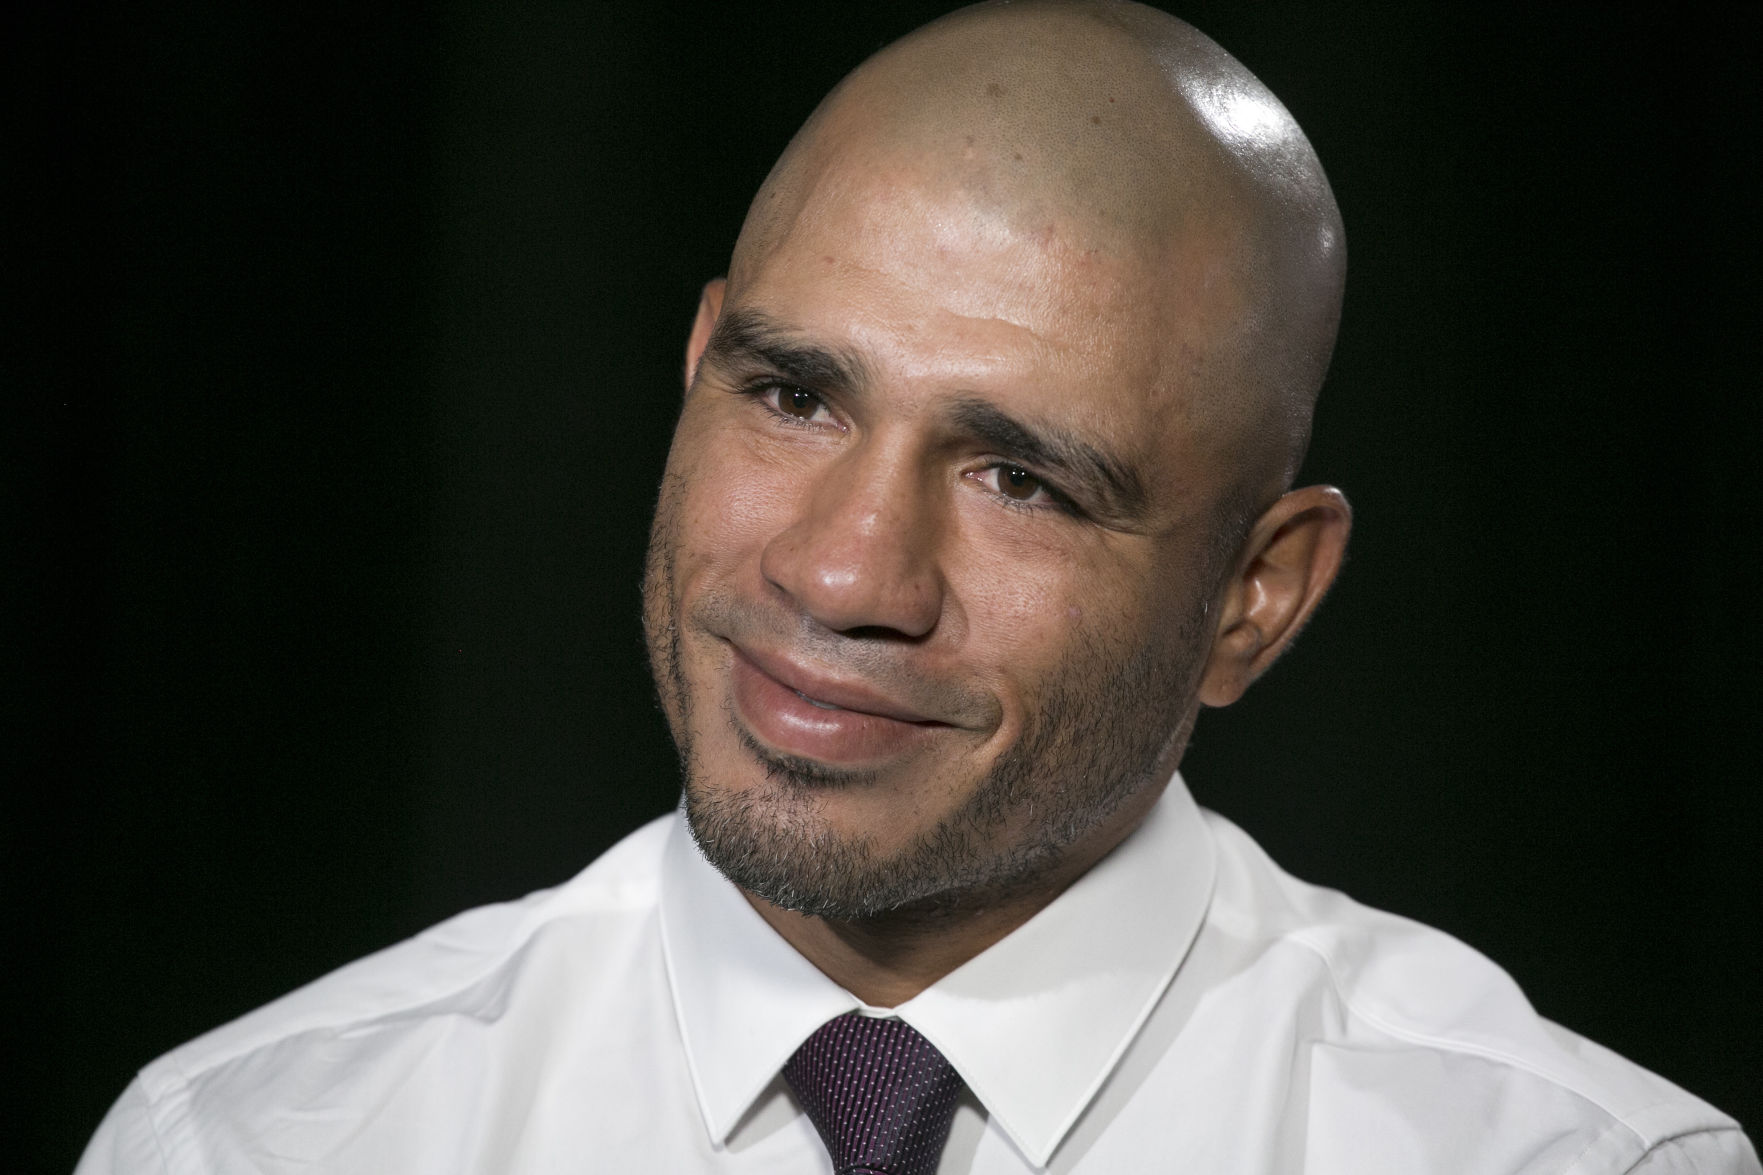 AP Interview: Cotto bids farewell to ring, embraces family - The Garden ...